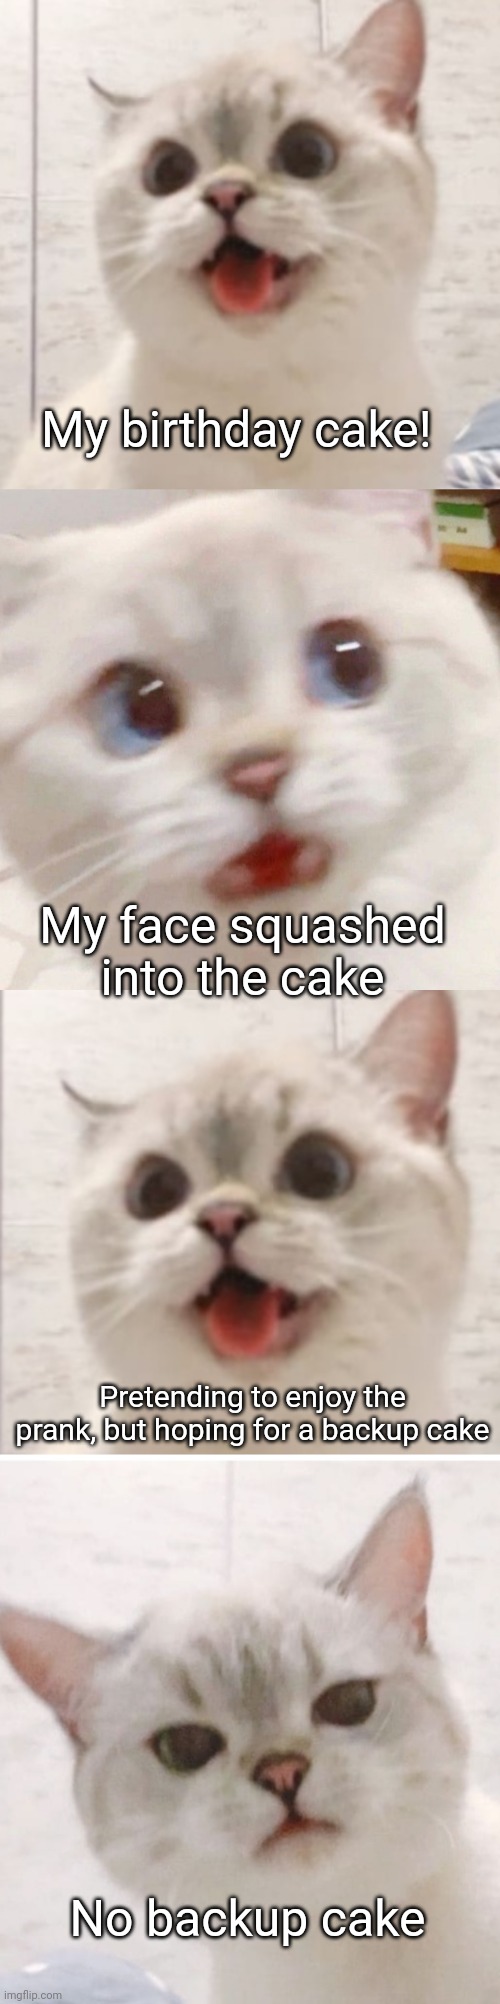 Pranks are funny, but I want cake | My birthday cake! My face squashed into the cake; Pretending to enjoy the prank, but hoping for a backup cake; No backup cake | image tagged in prank,birthday cake,cake,funny memes,smiling cat,sad cat | made w/ Imgflip meme maker